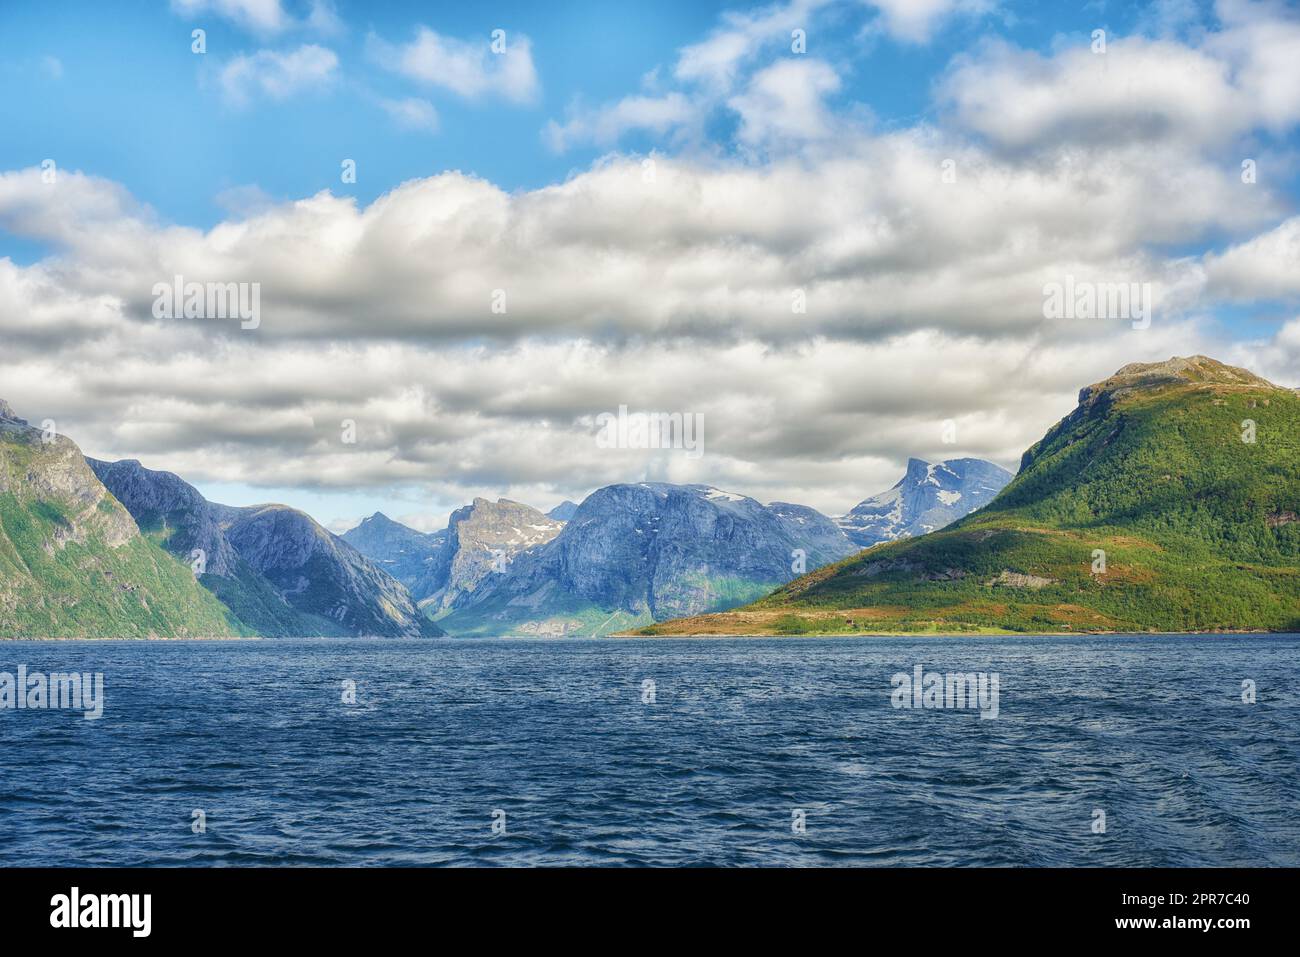 Landscape of mountains north of polar and arctic circle in Bodo, Norway. Scenic view of green hills surrounded by ocean in remote area with clouds. Traveling abroad, overseas for holiday and vacation Stock Photo